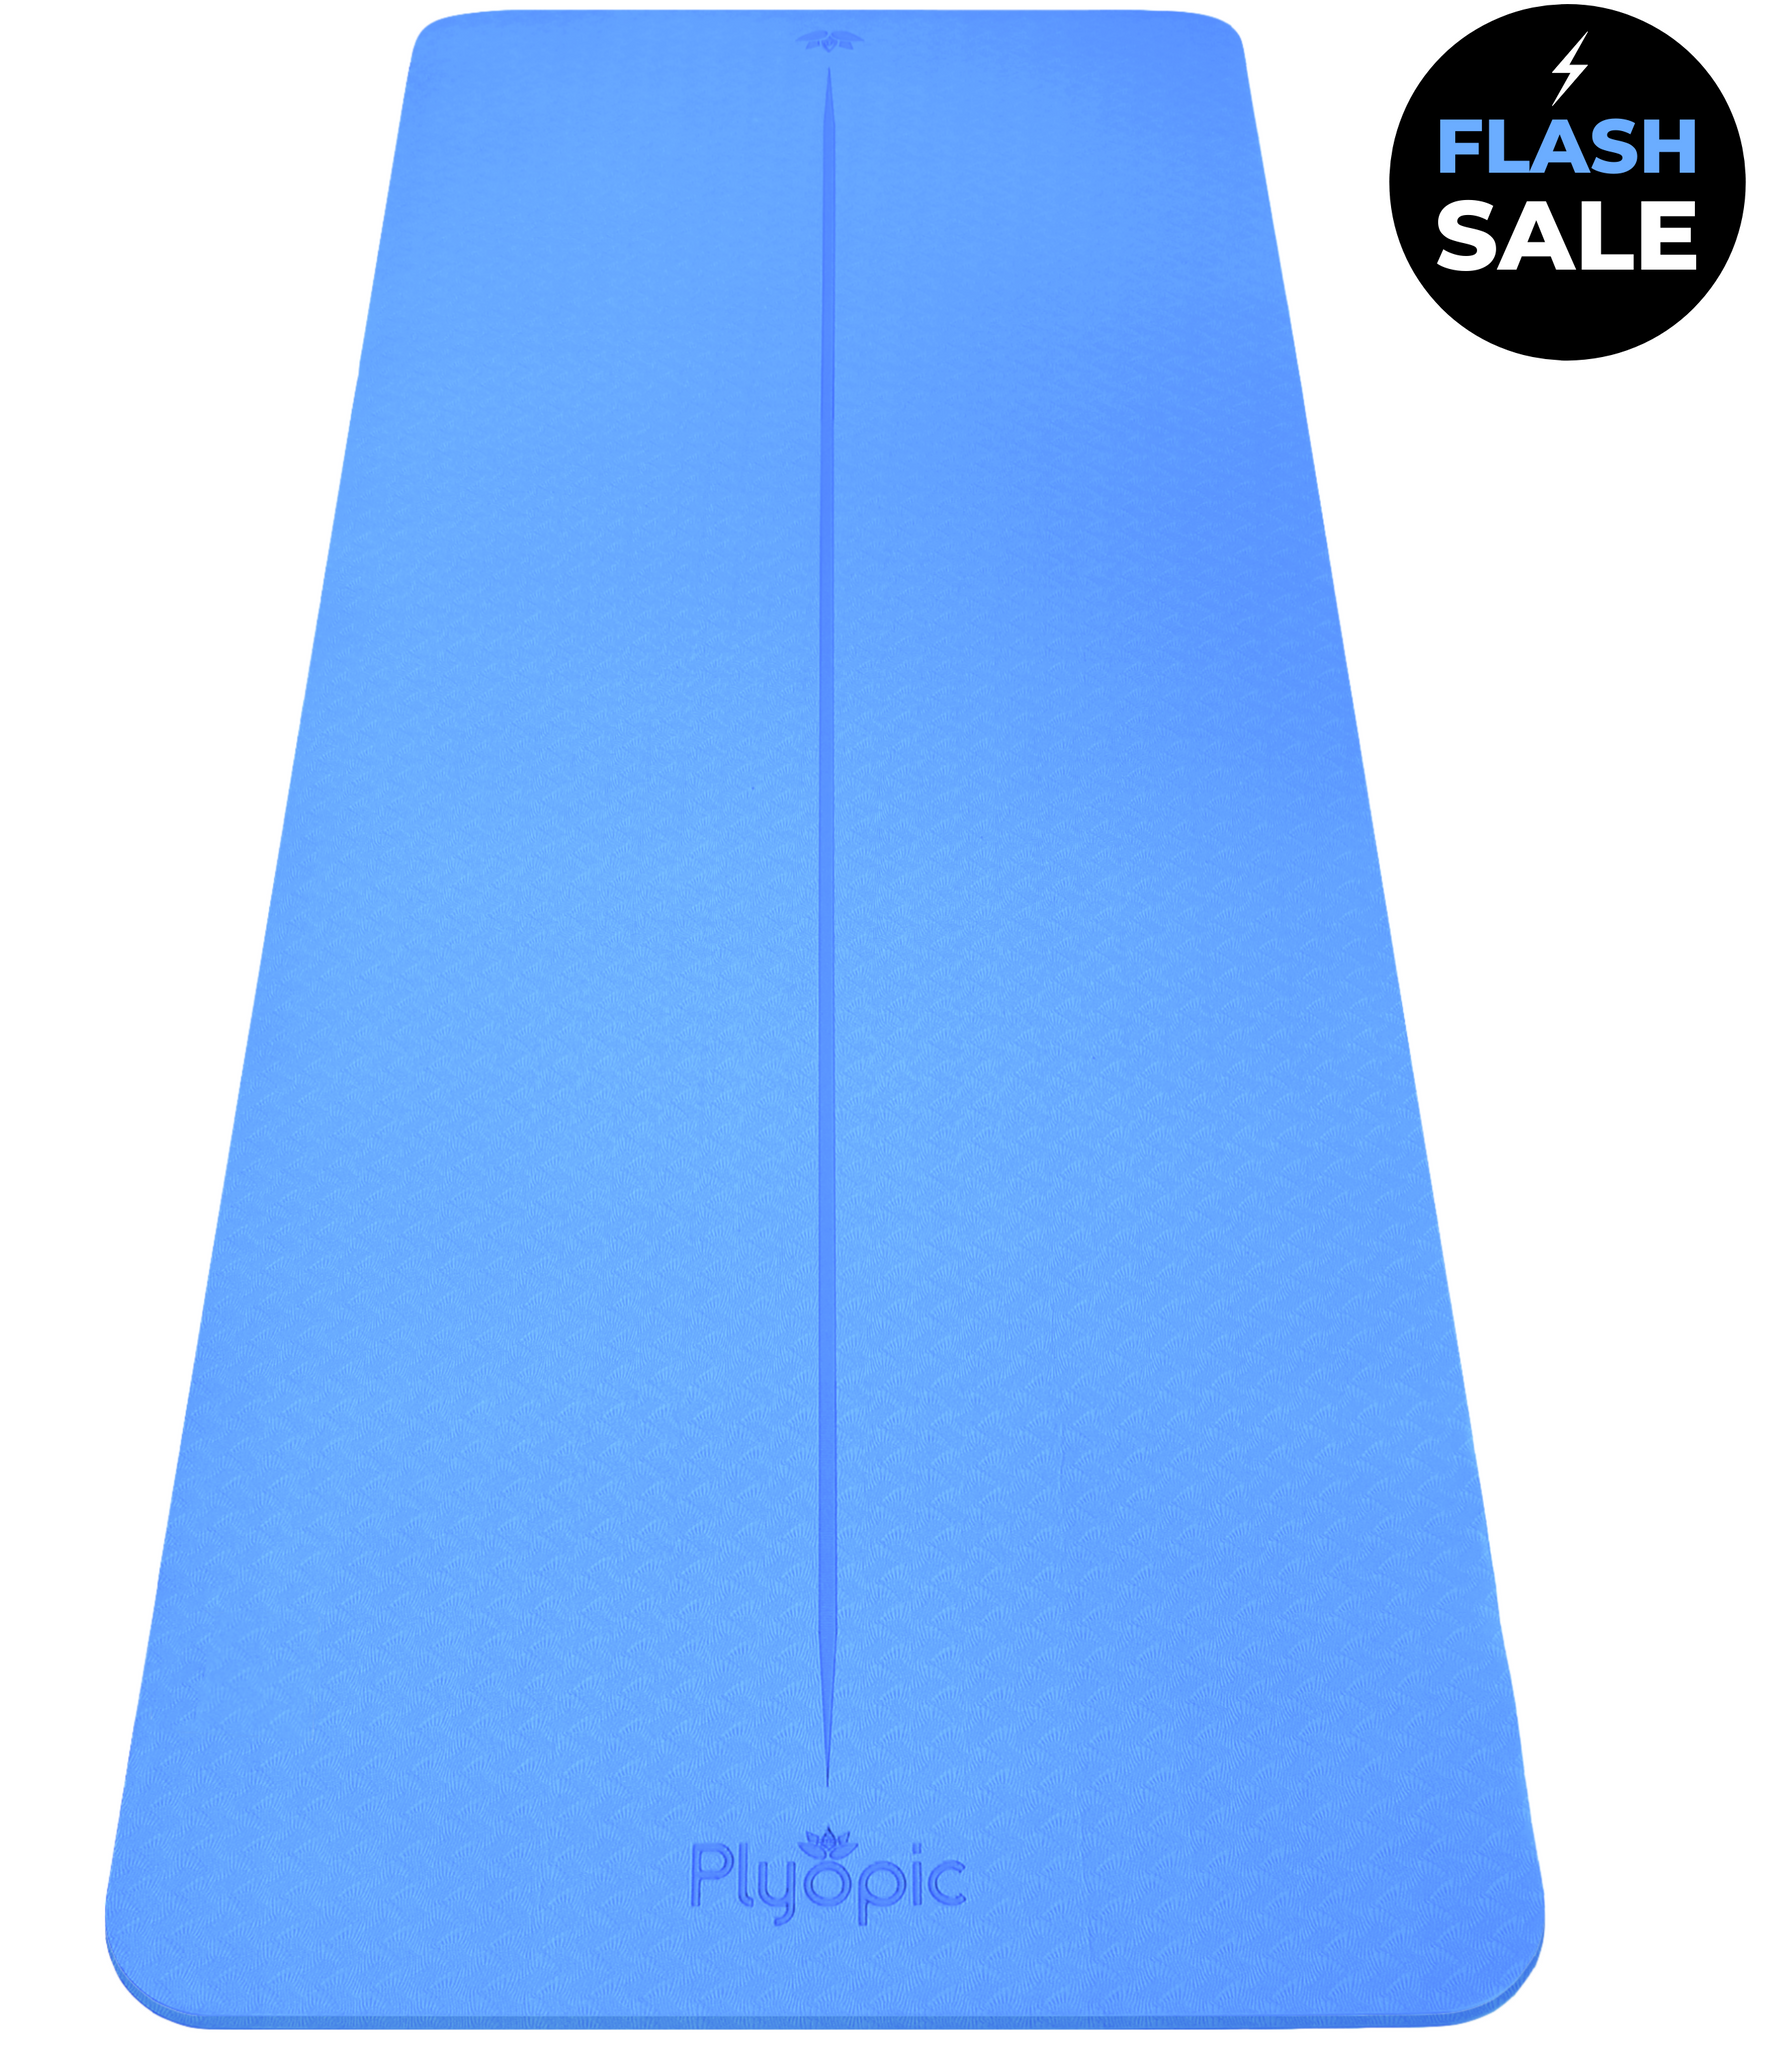 Blue Kids Yoga Mat - Phresh Chi Mat & How-to Poster - Exercise Game – Easy  to Learn, Makes Yoga Fun - Helps Alignment, Flexibility, Weight-Loss, and  Mindfulness - Great for Kid, Family, Mats -  Canada